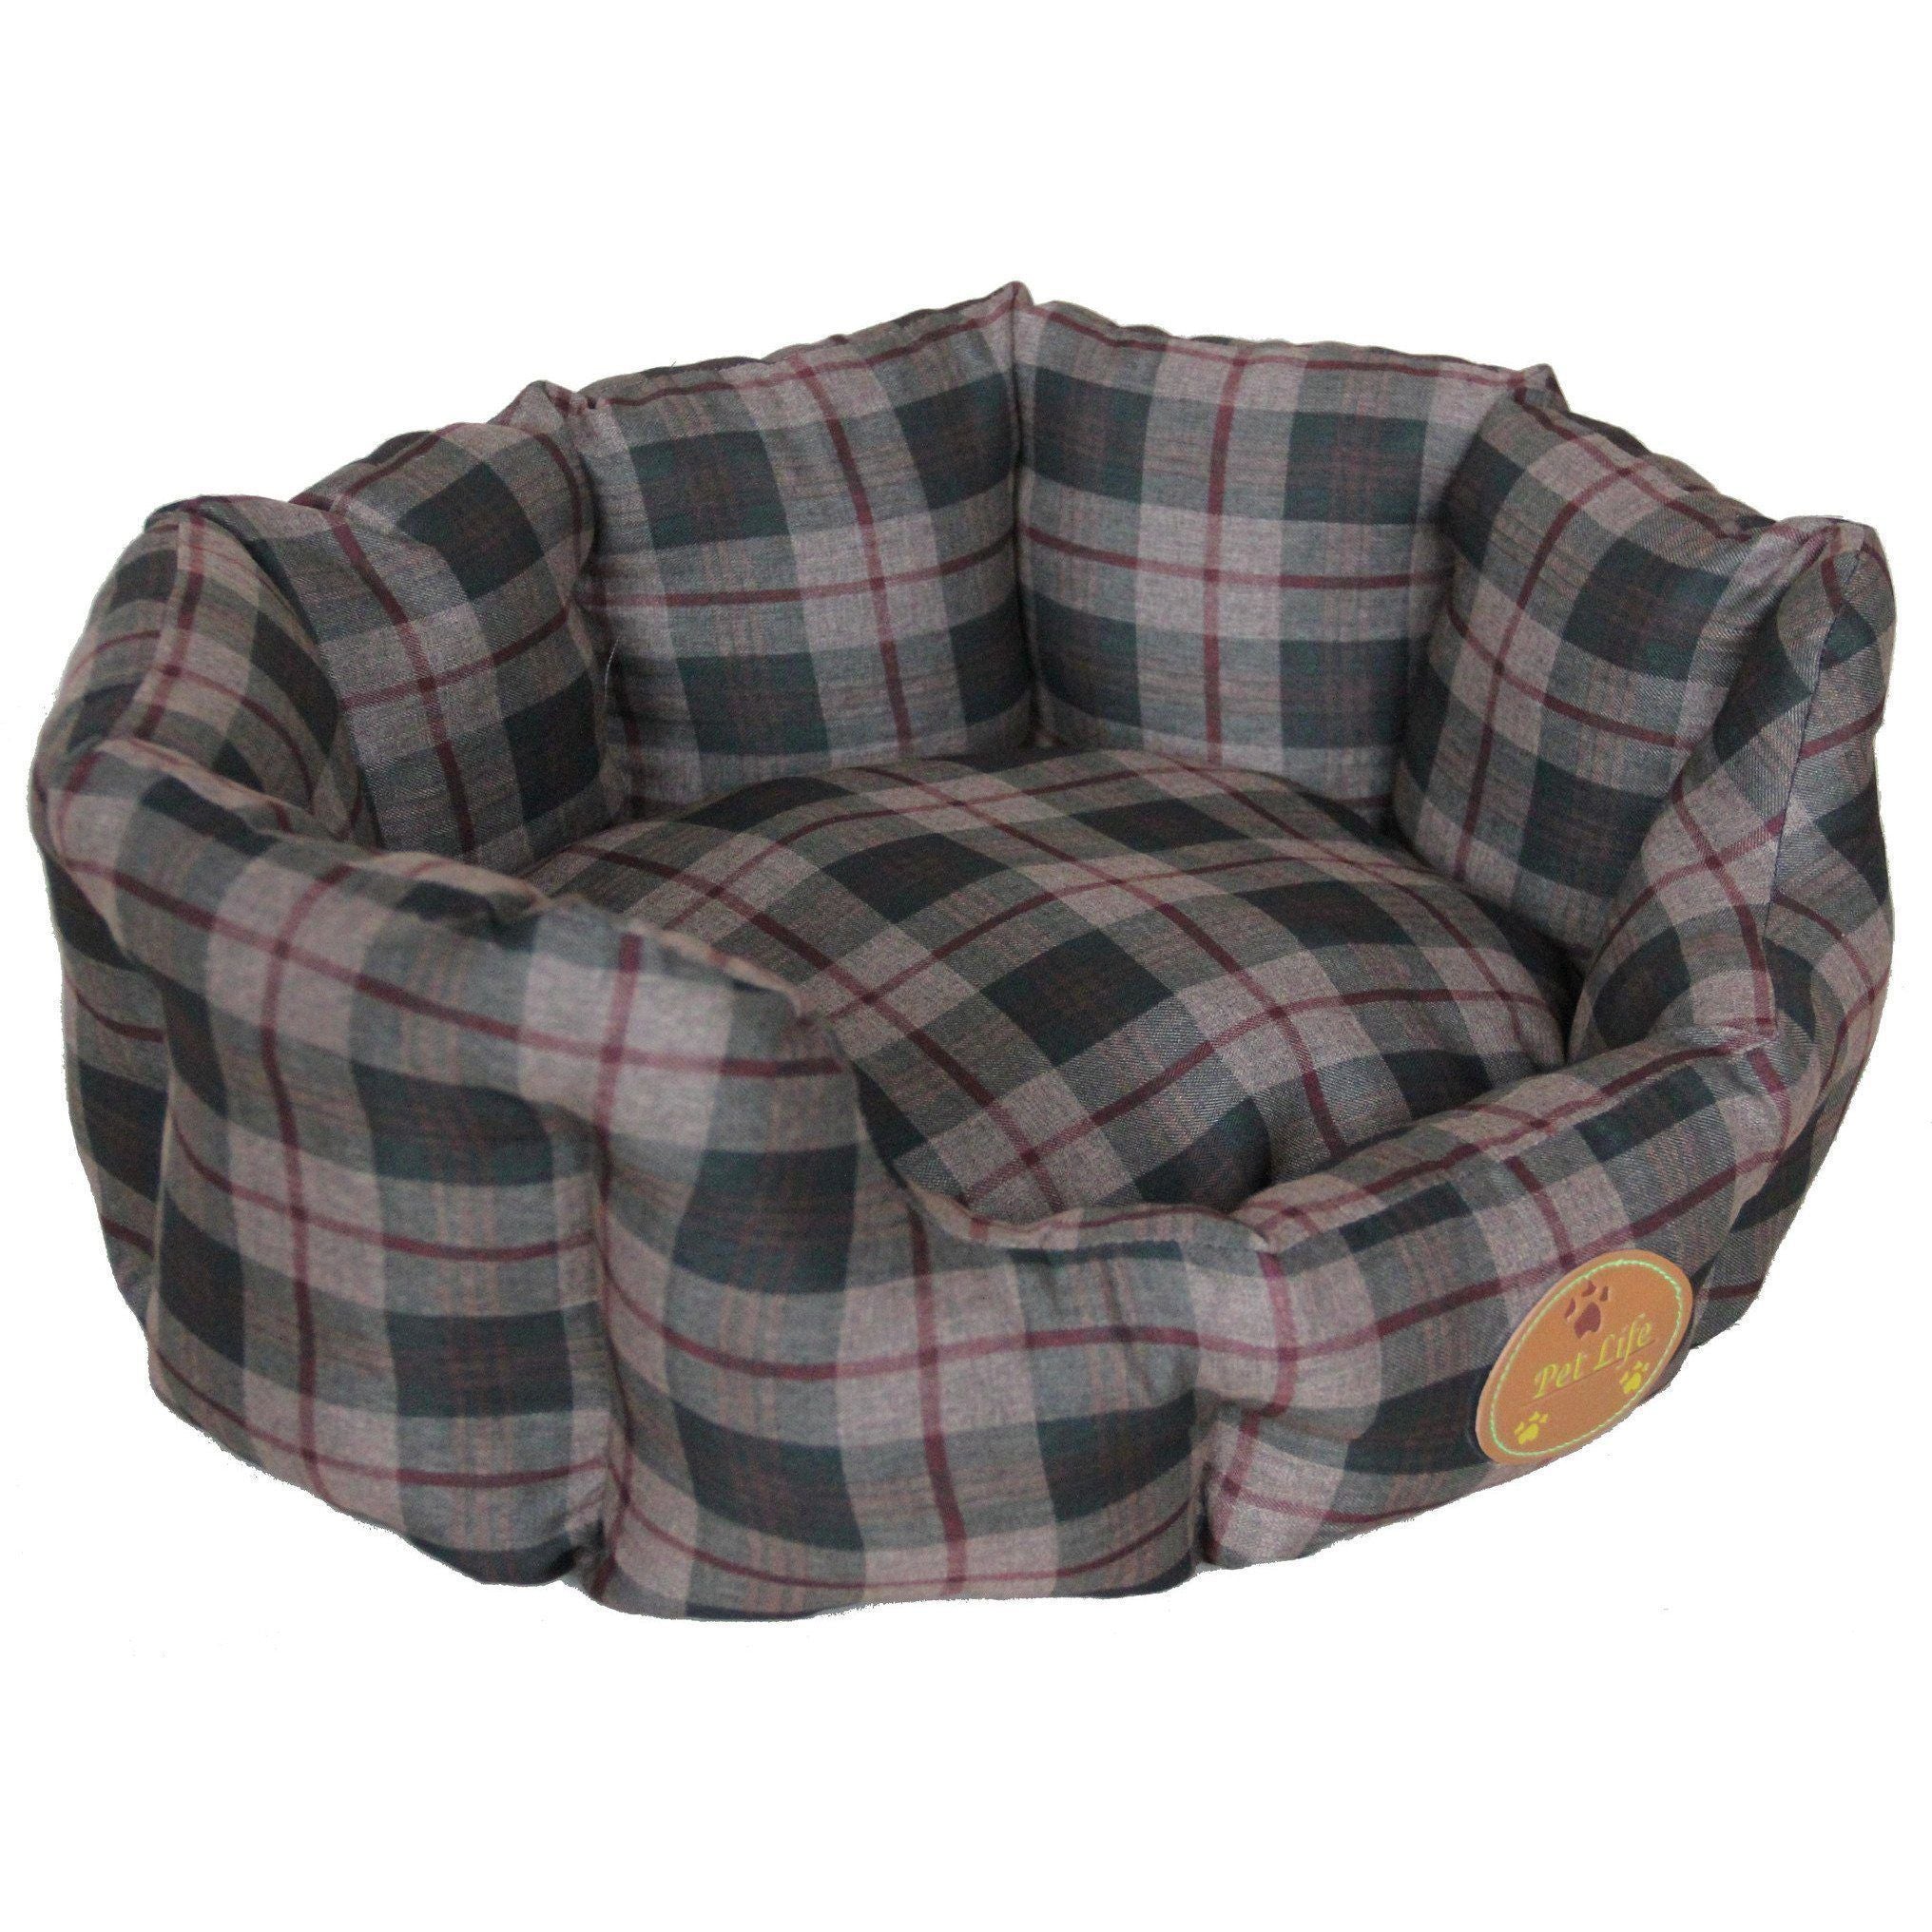 Pet Life ® 'Wick-Away' Wick-proof Nano-Silver and Anti-Bacterial Water Resistant Rounded Circular Pet Dog Bed Lounge X-Small Olive Green Plaid